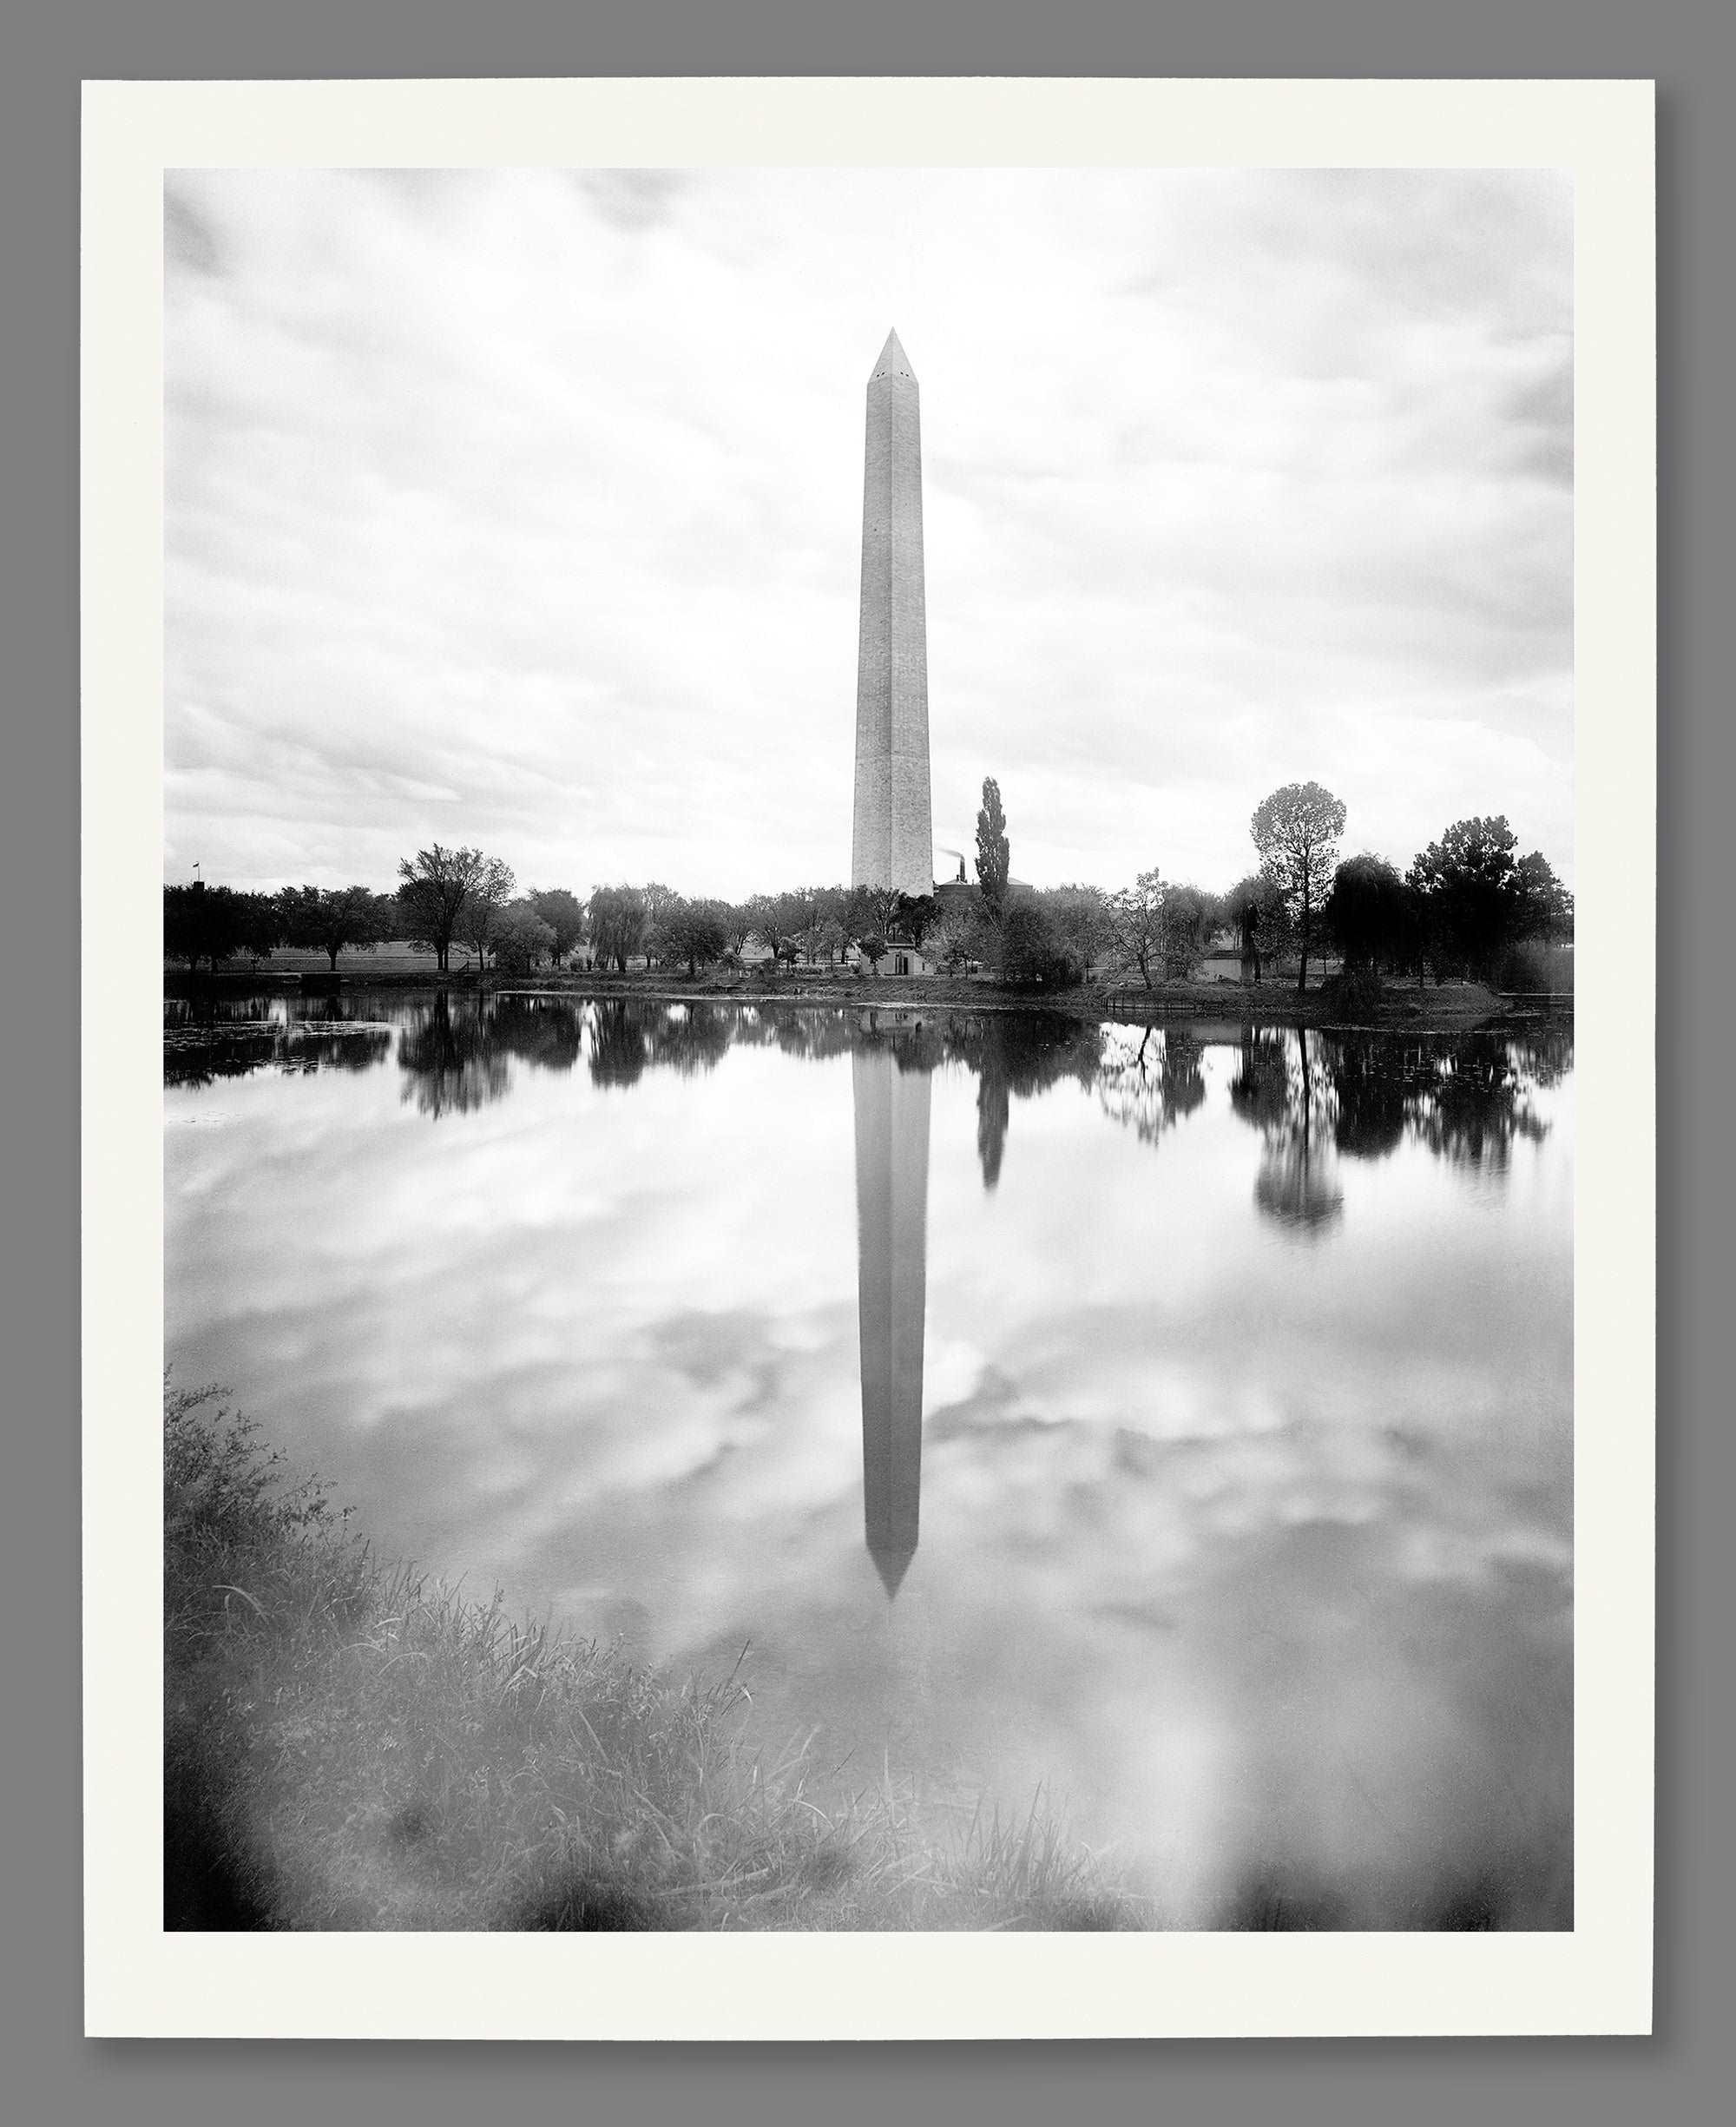 A paper print of a restored vintage image of the Washington Monument in Washington DC